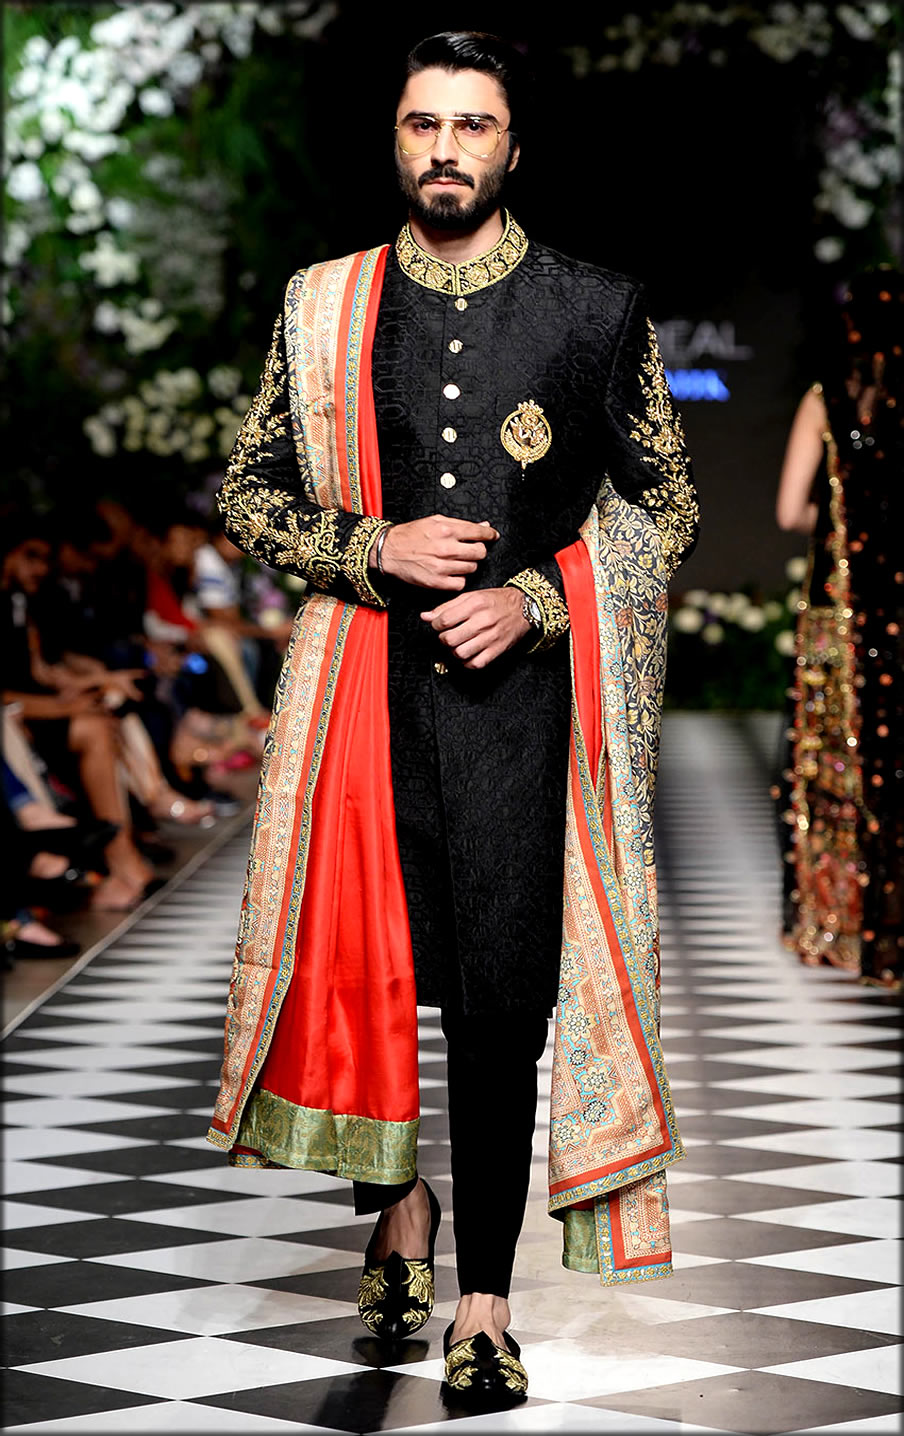 Amazing Indian Wedding Dresses For Men In Winter Learn more here ...